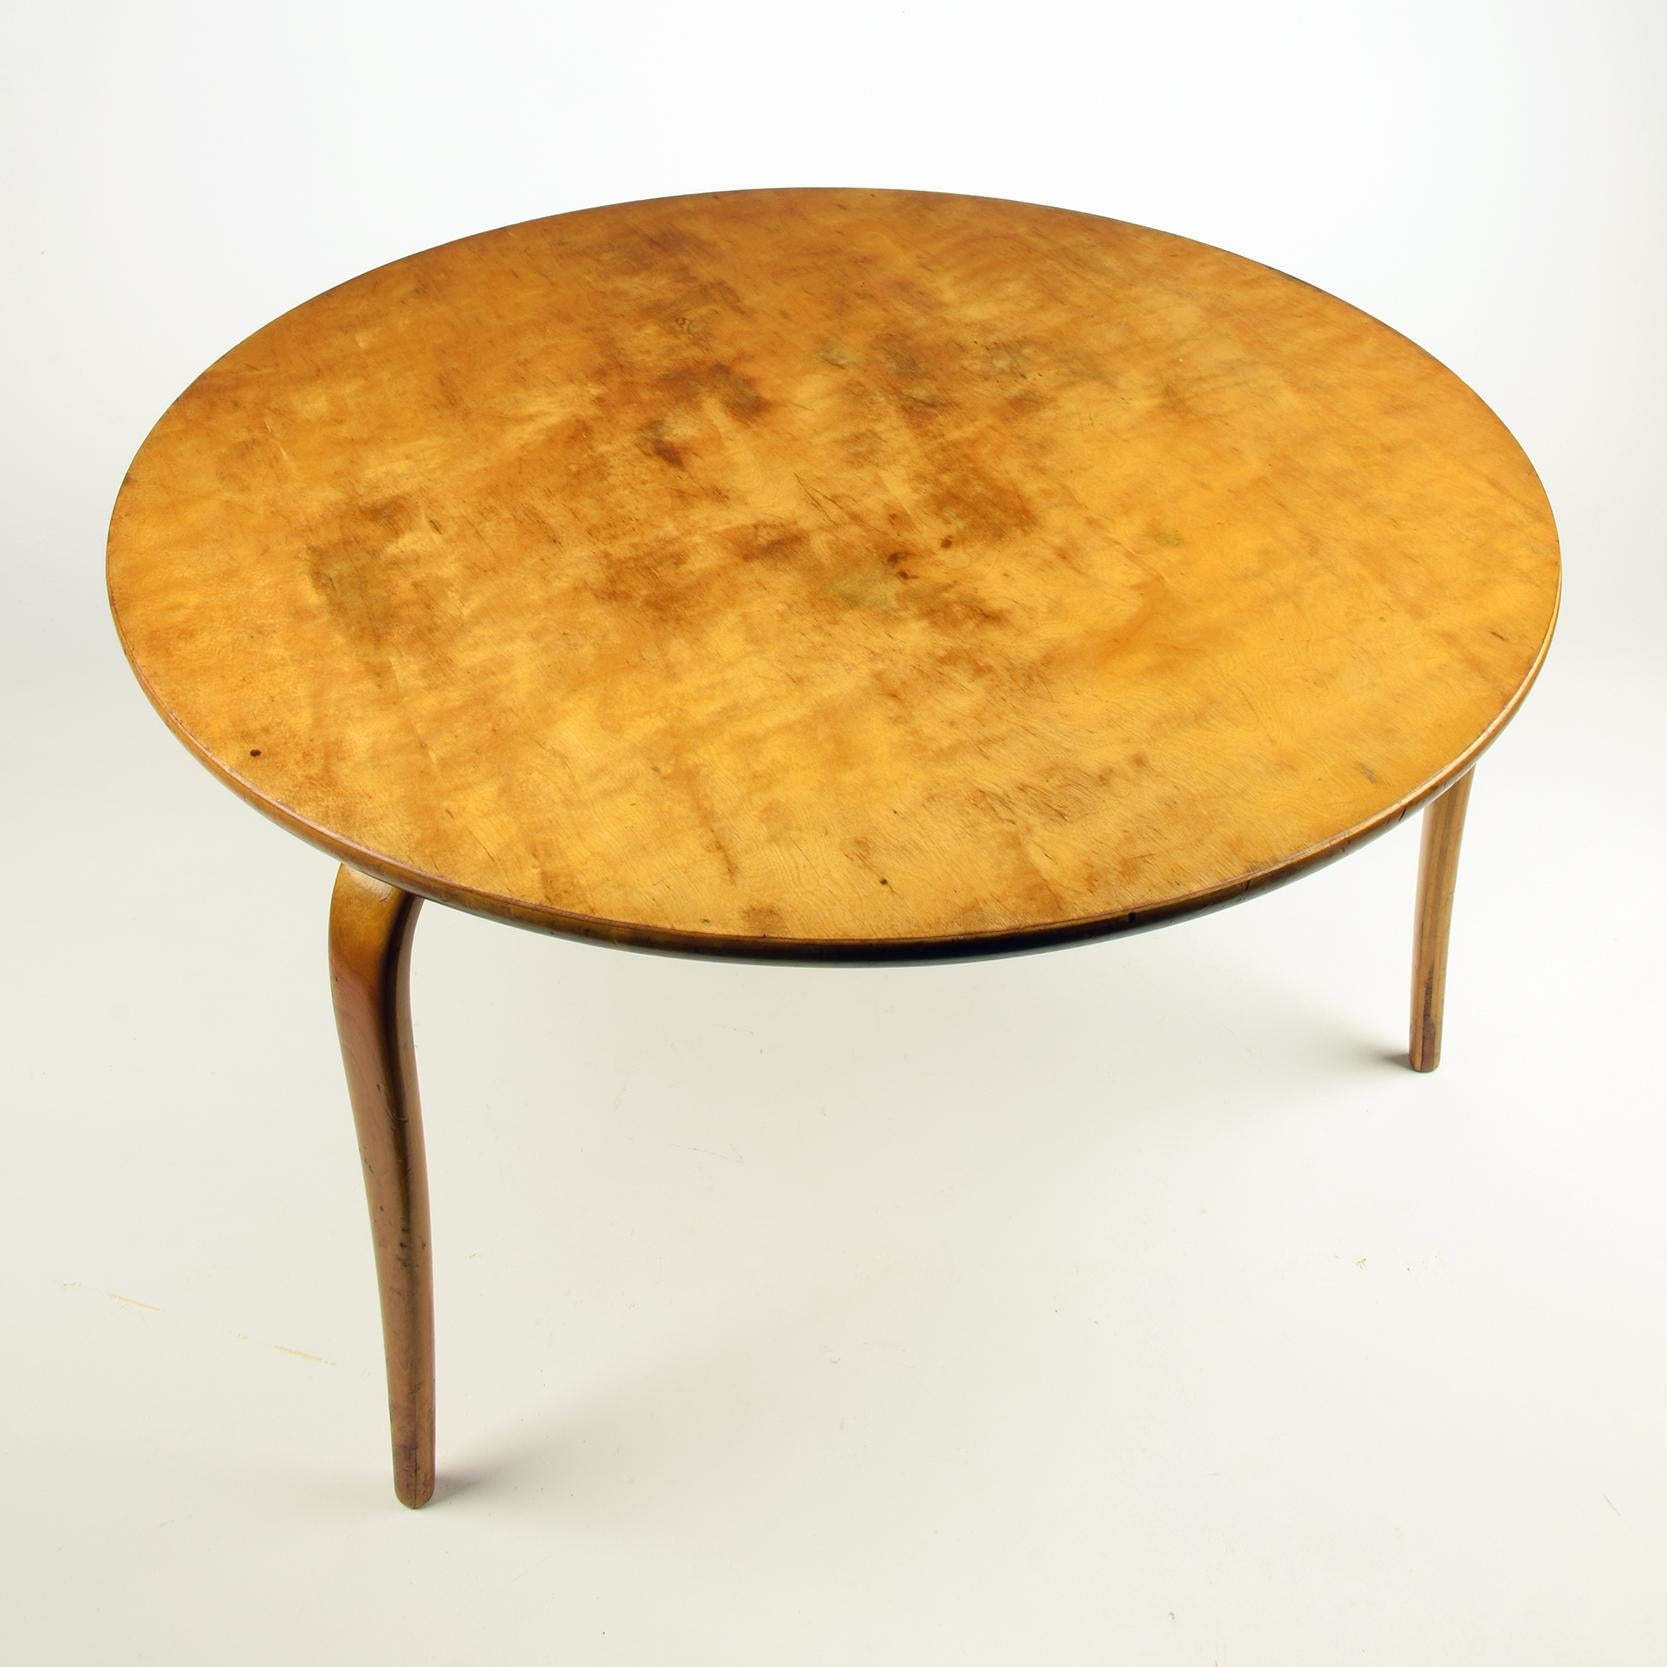 Swedish Bruno Mathsson, 'Annika' Table, Designed 1936, Beautiful Early Example pre-war For Sale